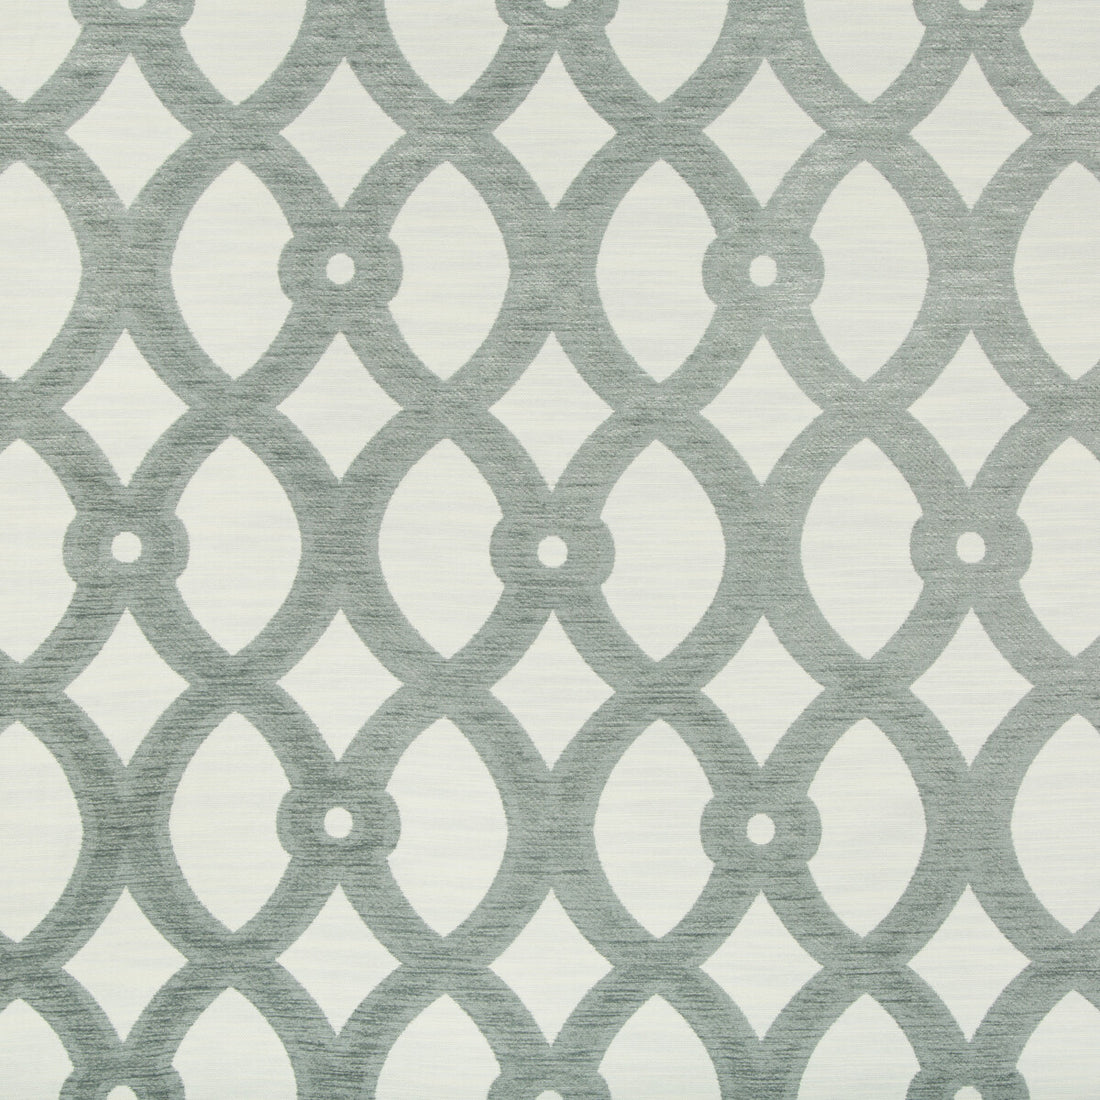 Kravet Design fabric in 34702-11 color - pattern 34702.11.0 - by Kravet Design in the Performance Crypton Home collection